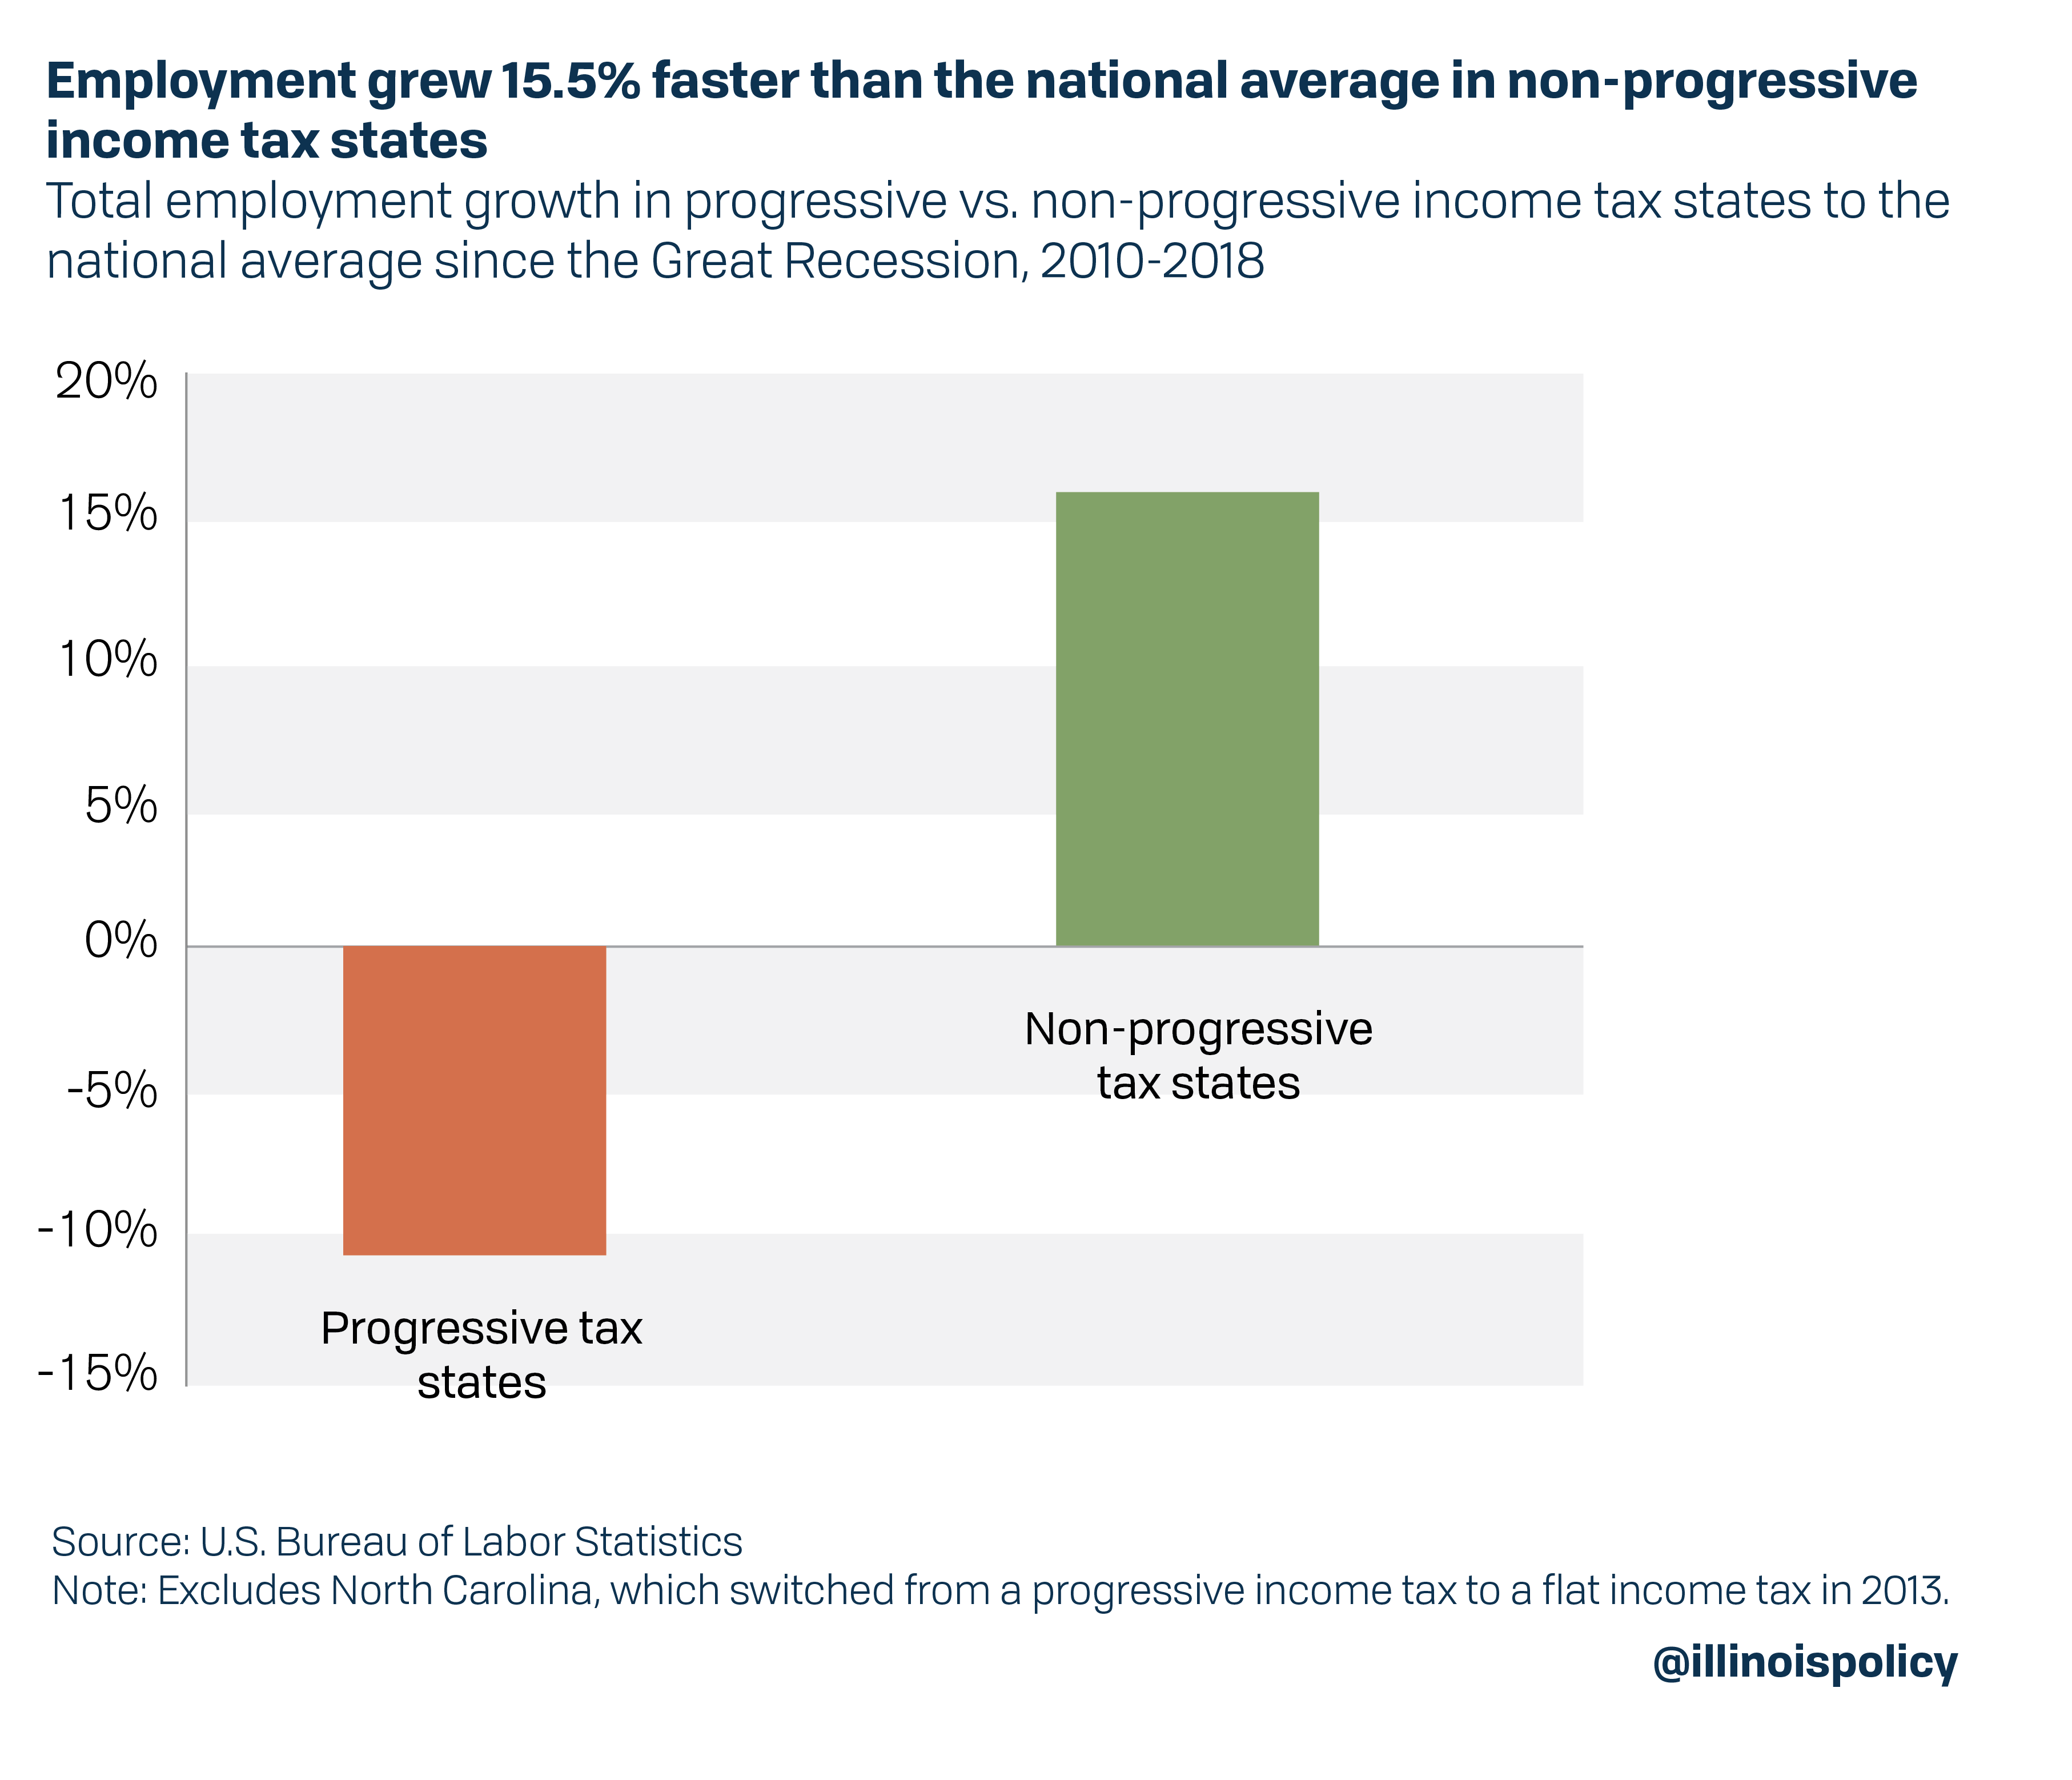 Employment grew 15.5% faster than the national average in non-progressive tax states